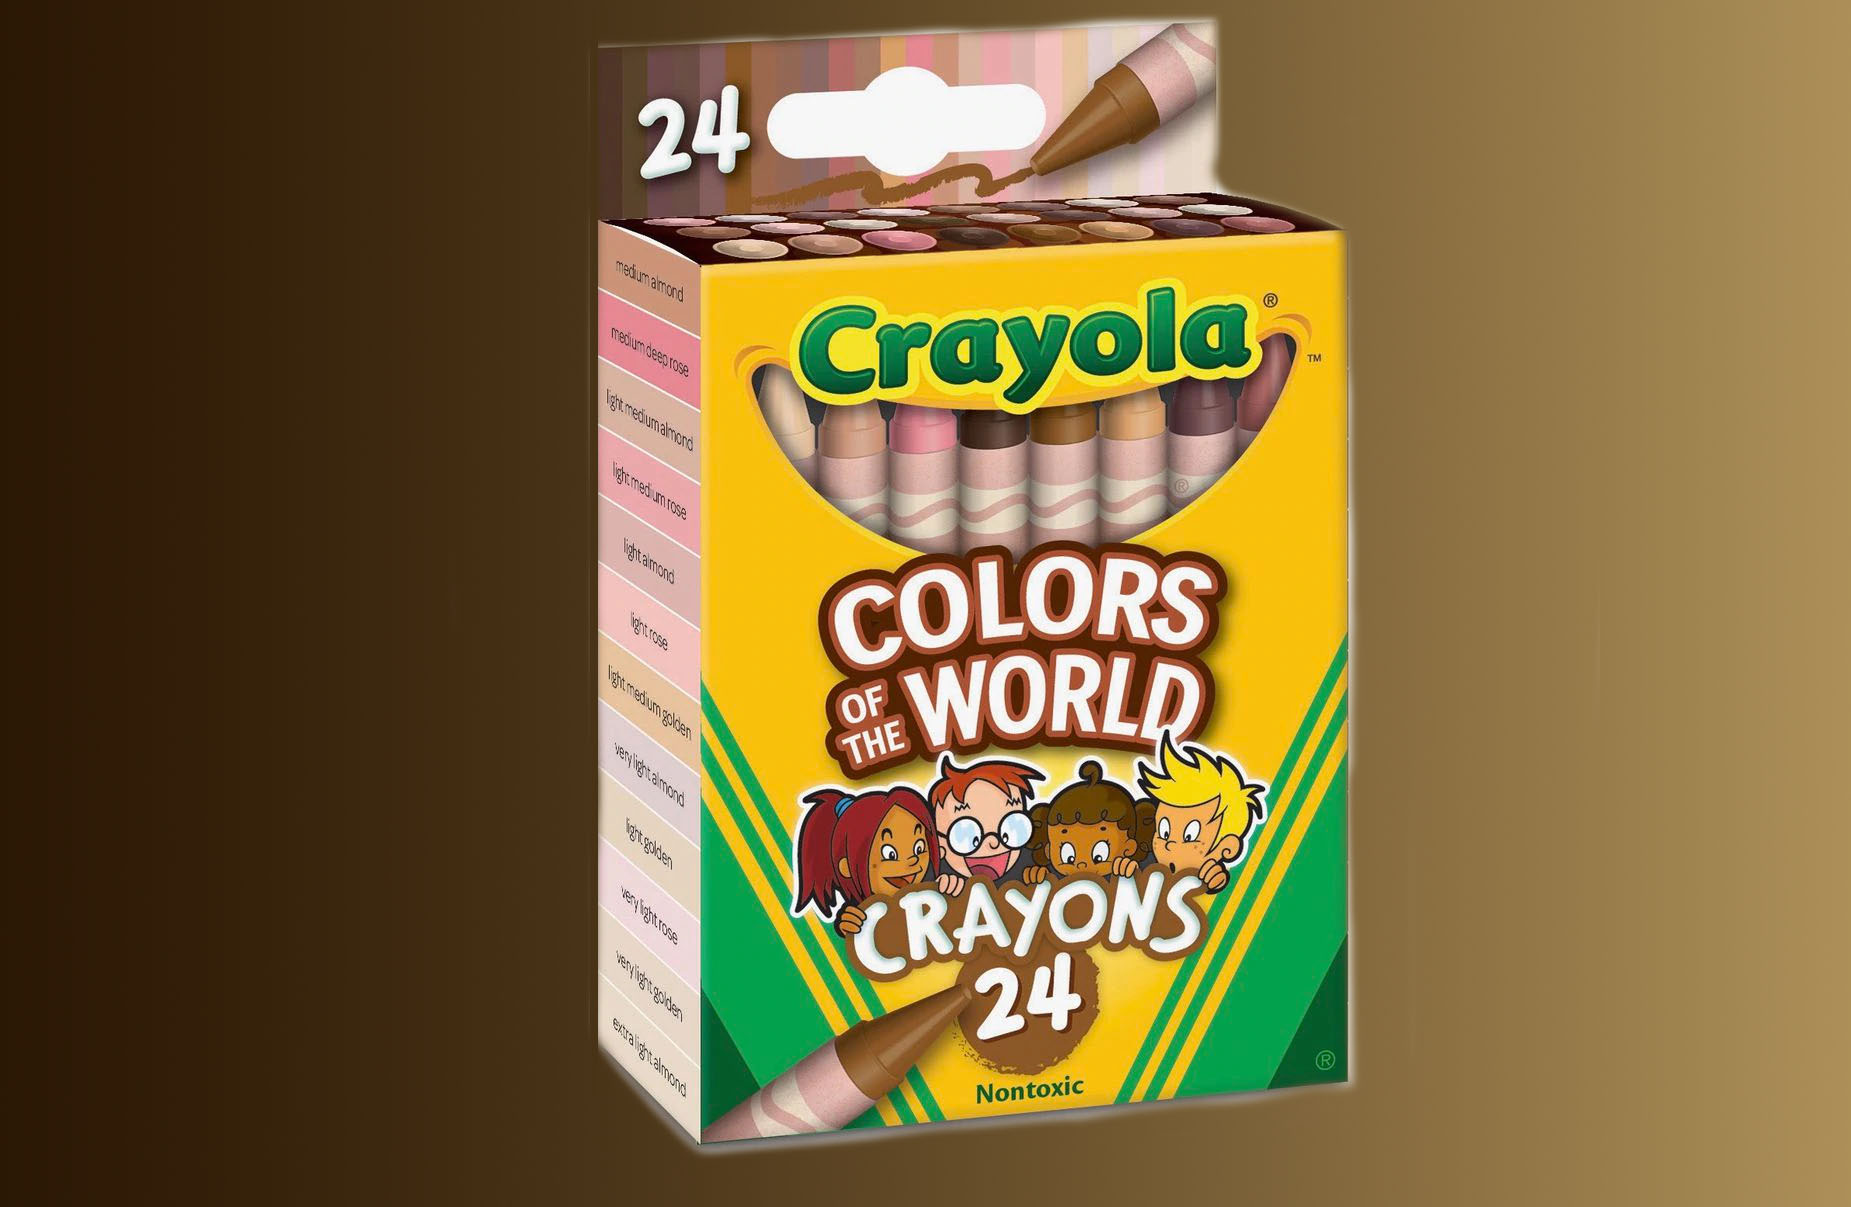 Crayola’s Newest Crayon Set Will Feature A Wider Range Of Skin Tones